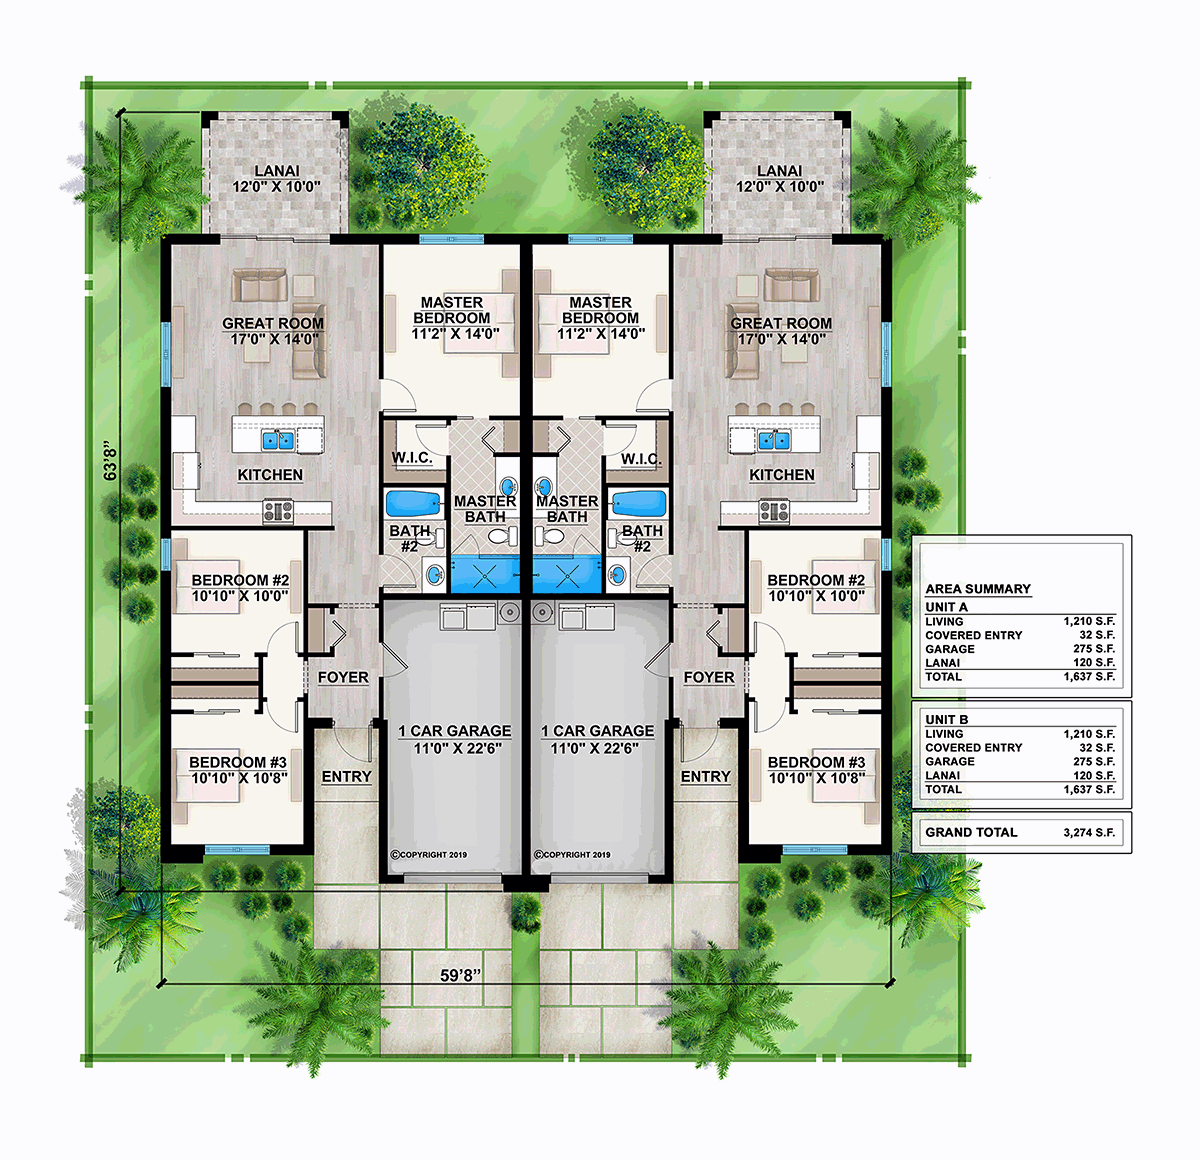 Contemporary Multi-Family Plan 52954 with 6 Beds, 4 Baths, 2 Car Garage Level One